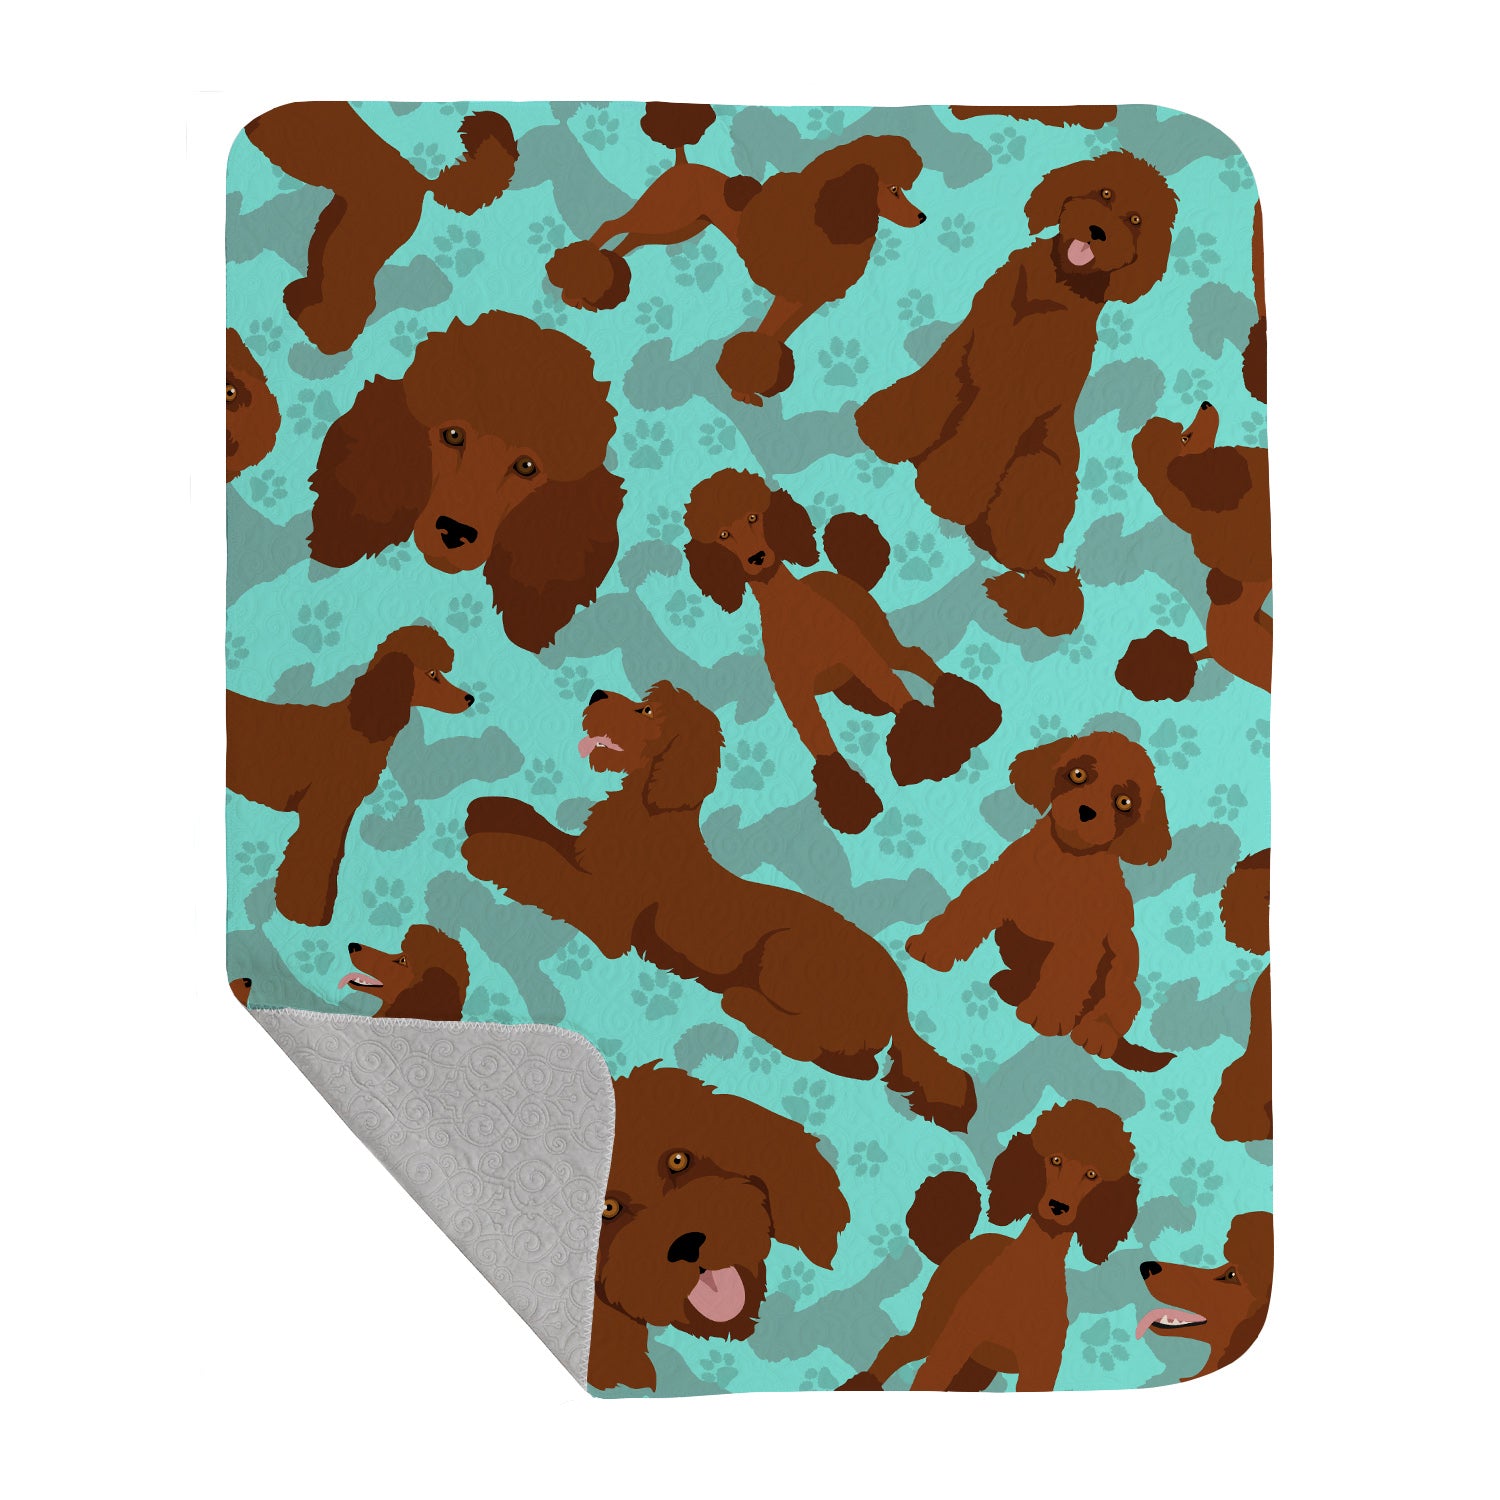 Buy this Chocolate Standard Poodle Quilted Blanket 50x60